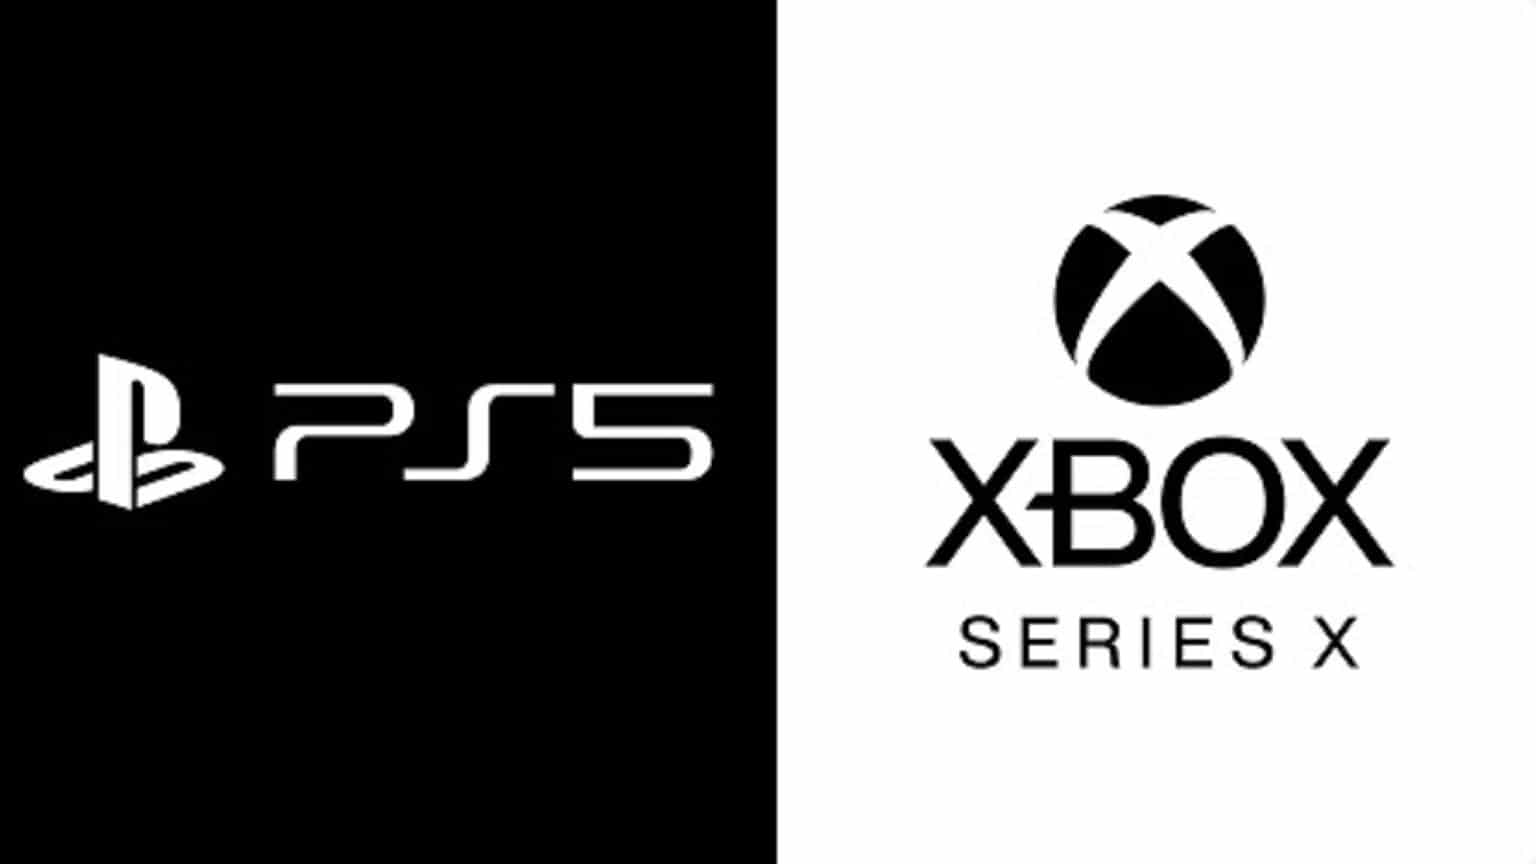 You are currently viewing XBOX Series X vs PlayStation 5 Comparison